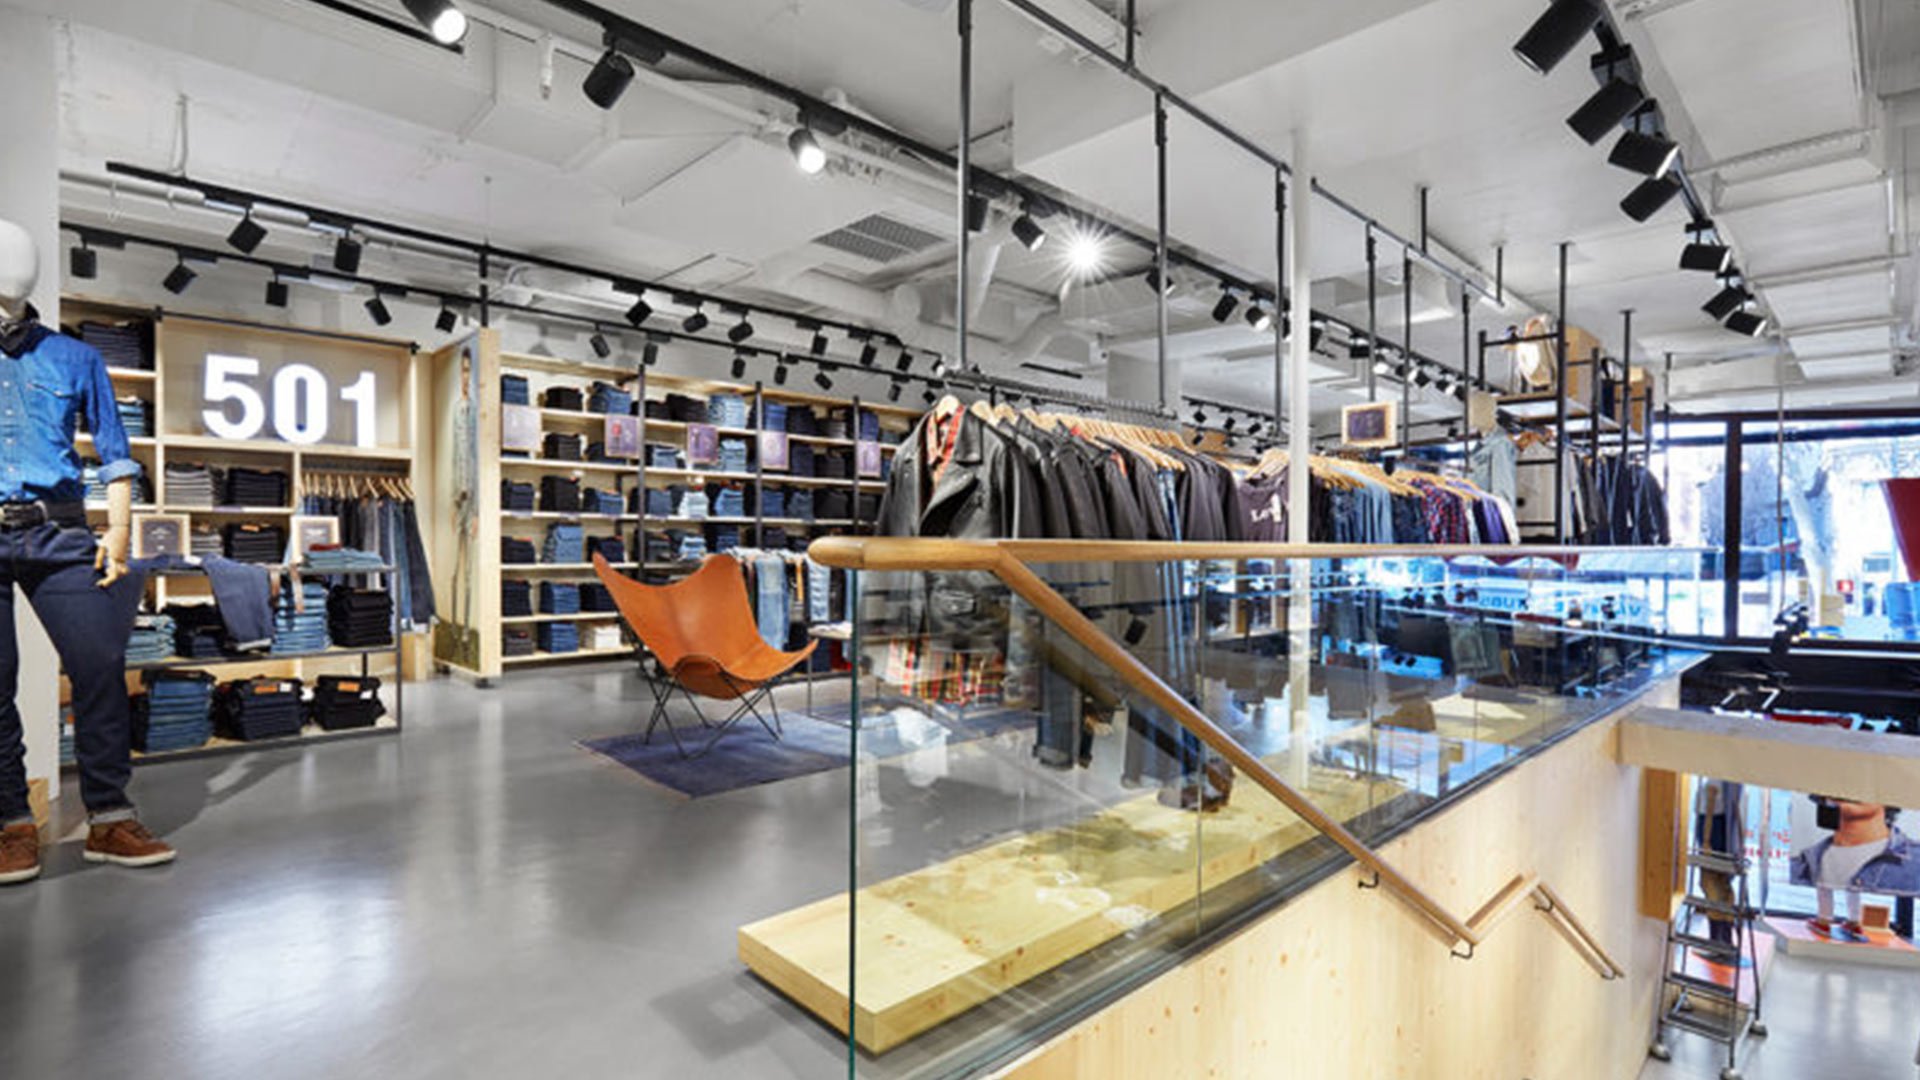 Building and fitting out of Levi's stores